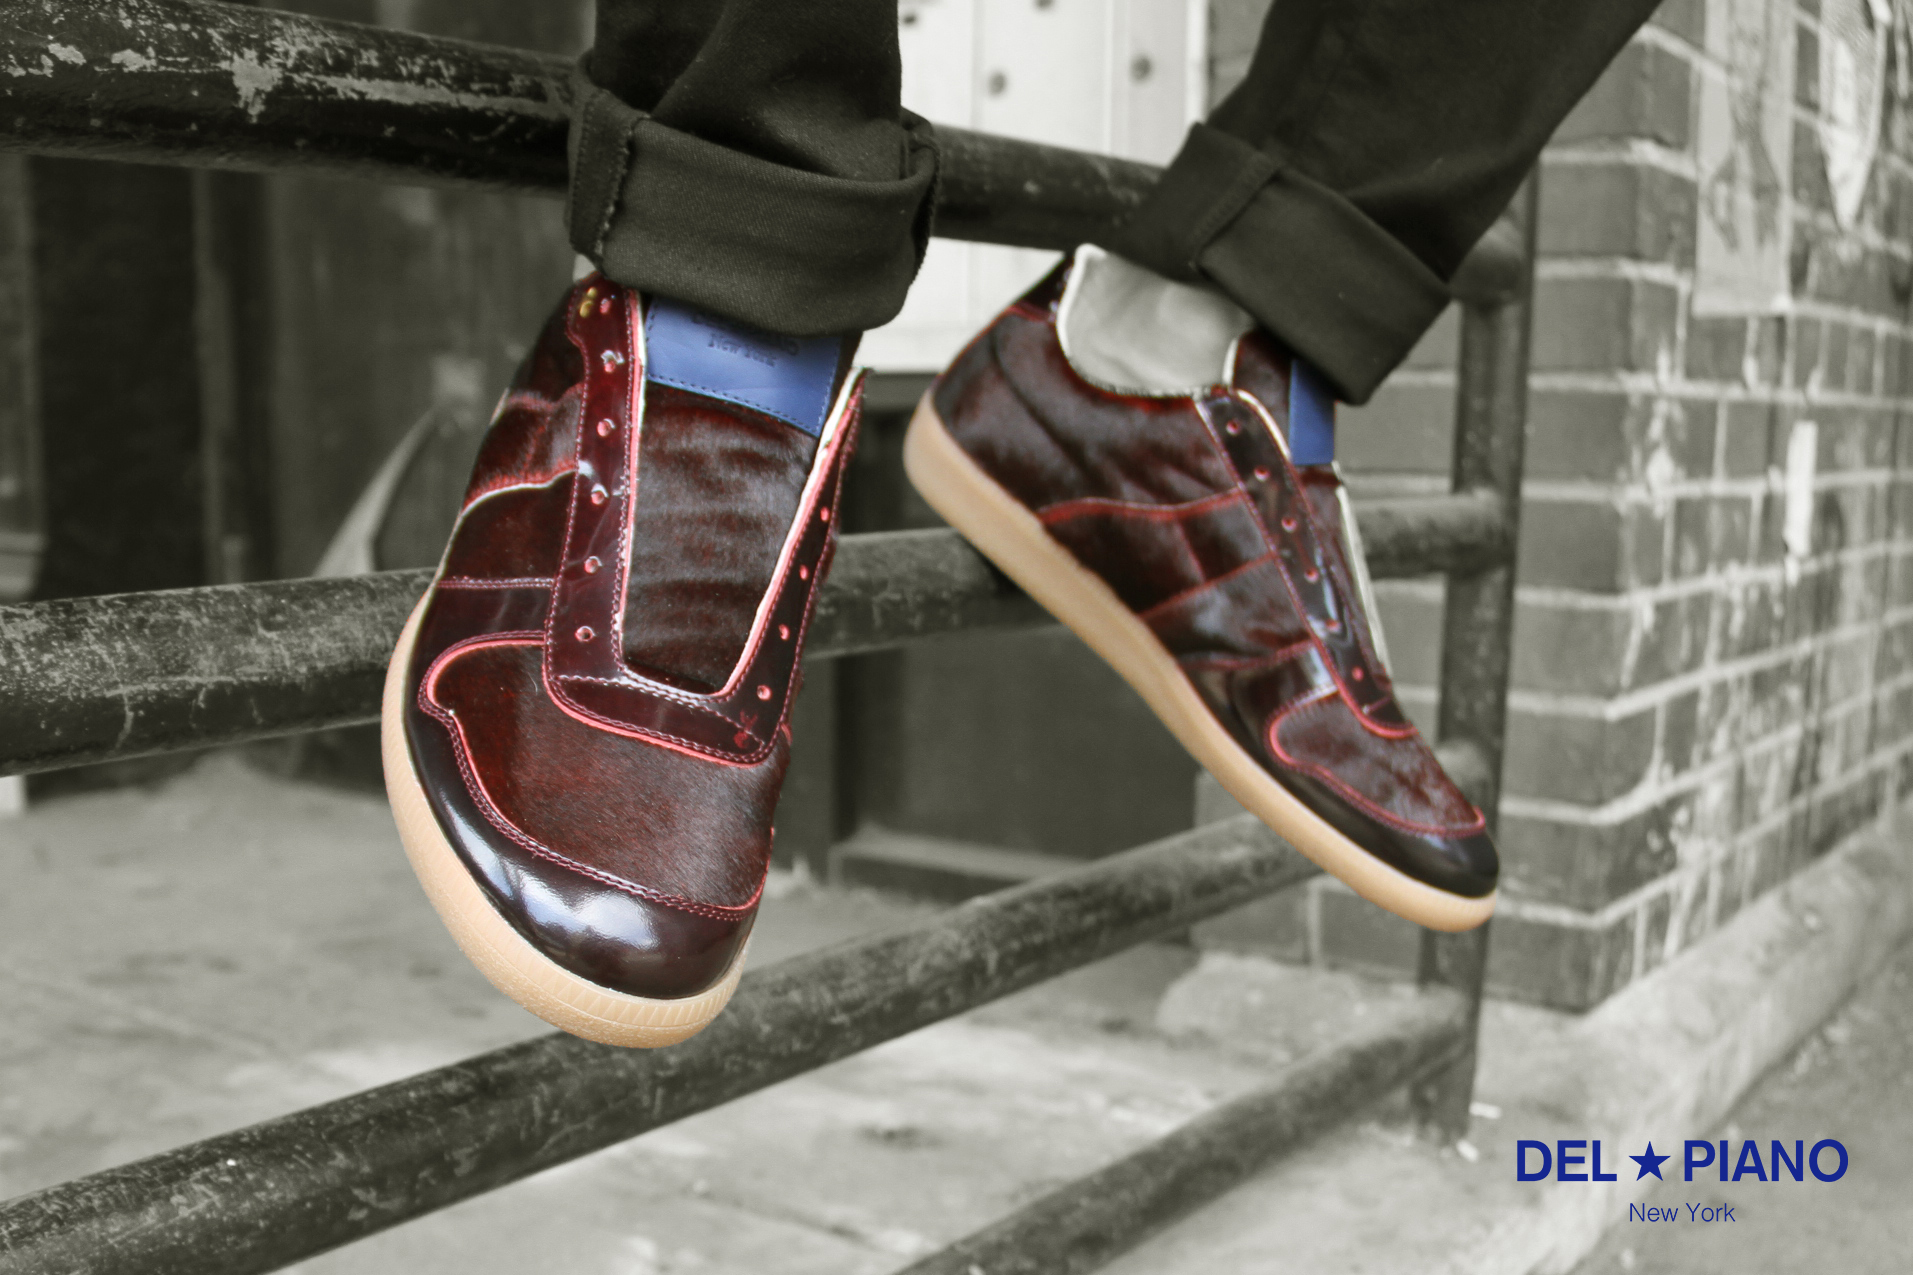 Delpiano NY F/W 2015 - Meatpacking District